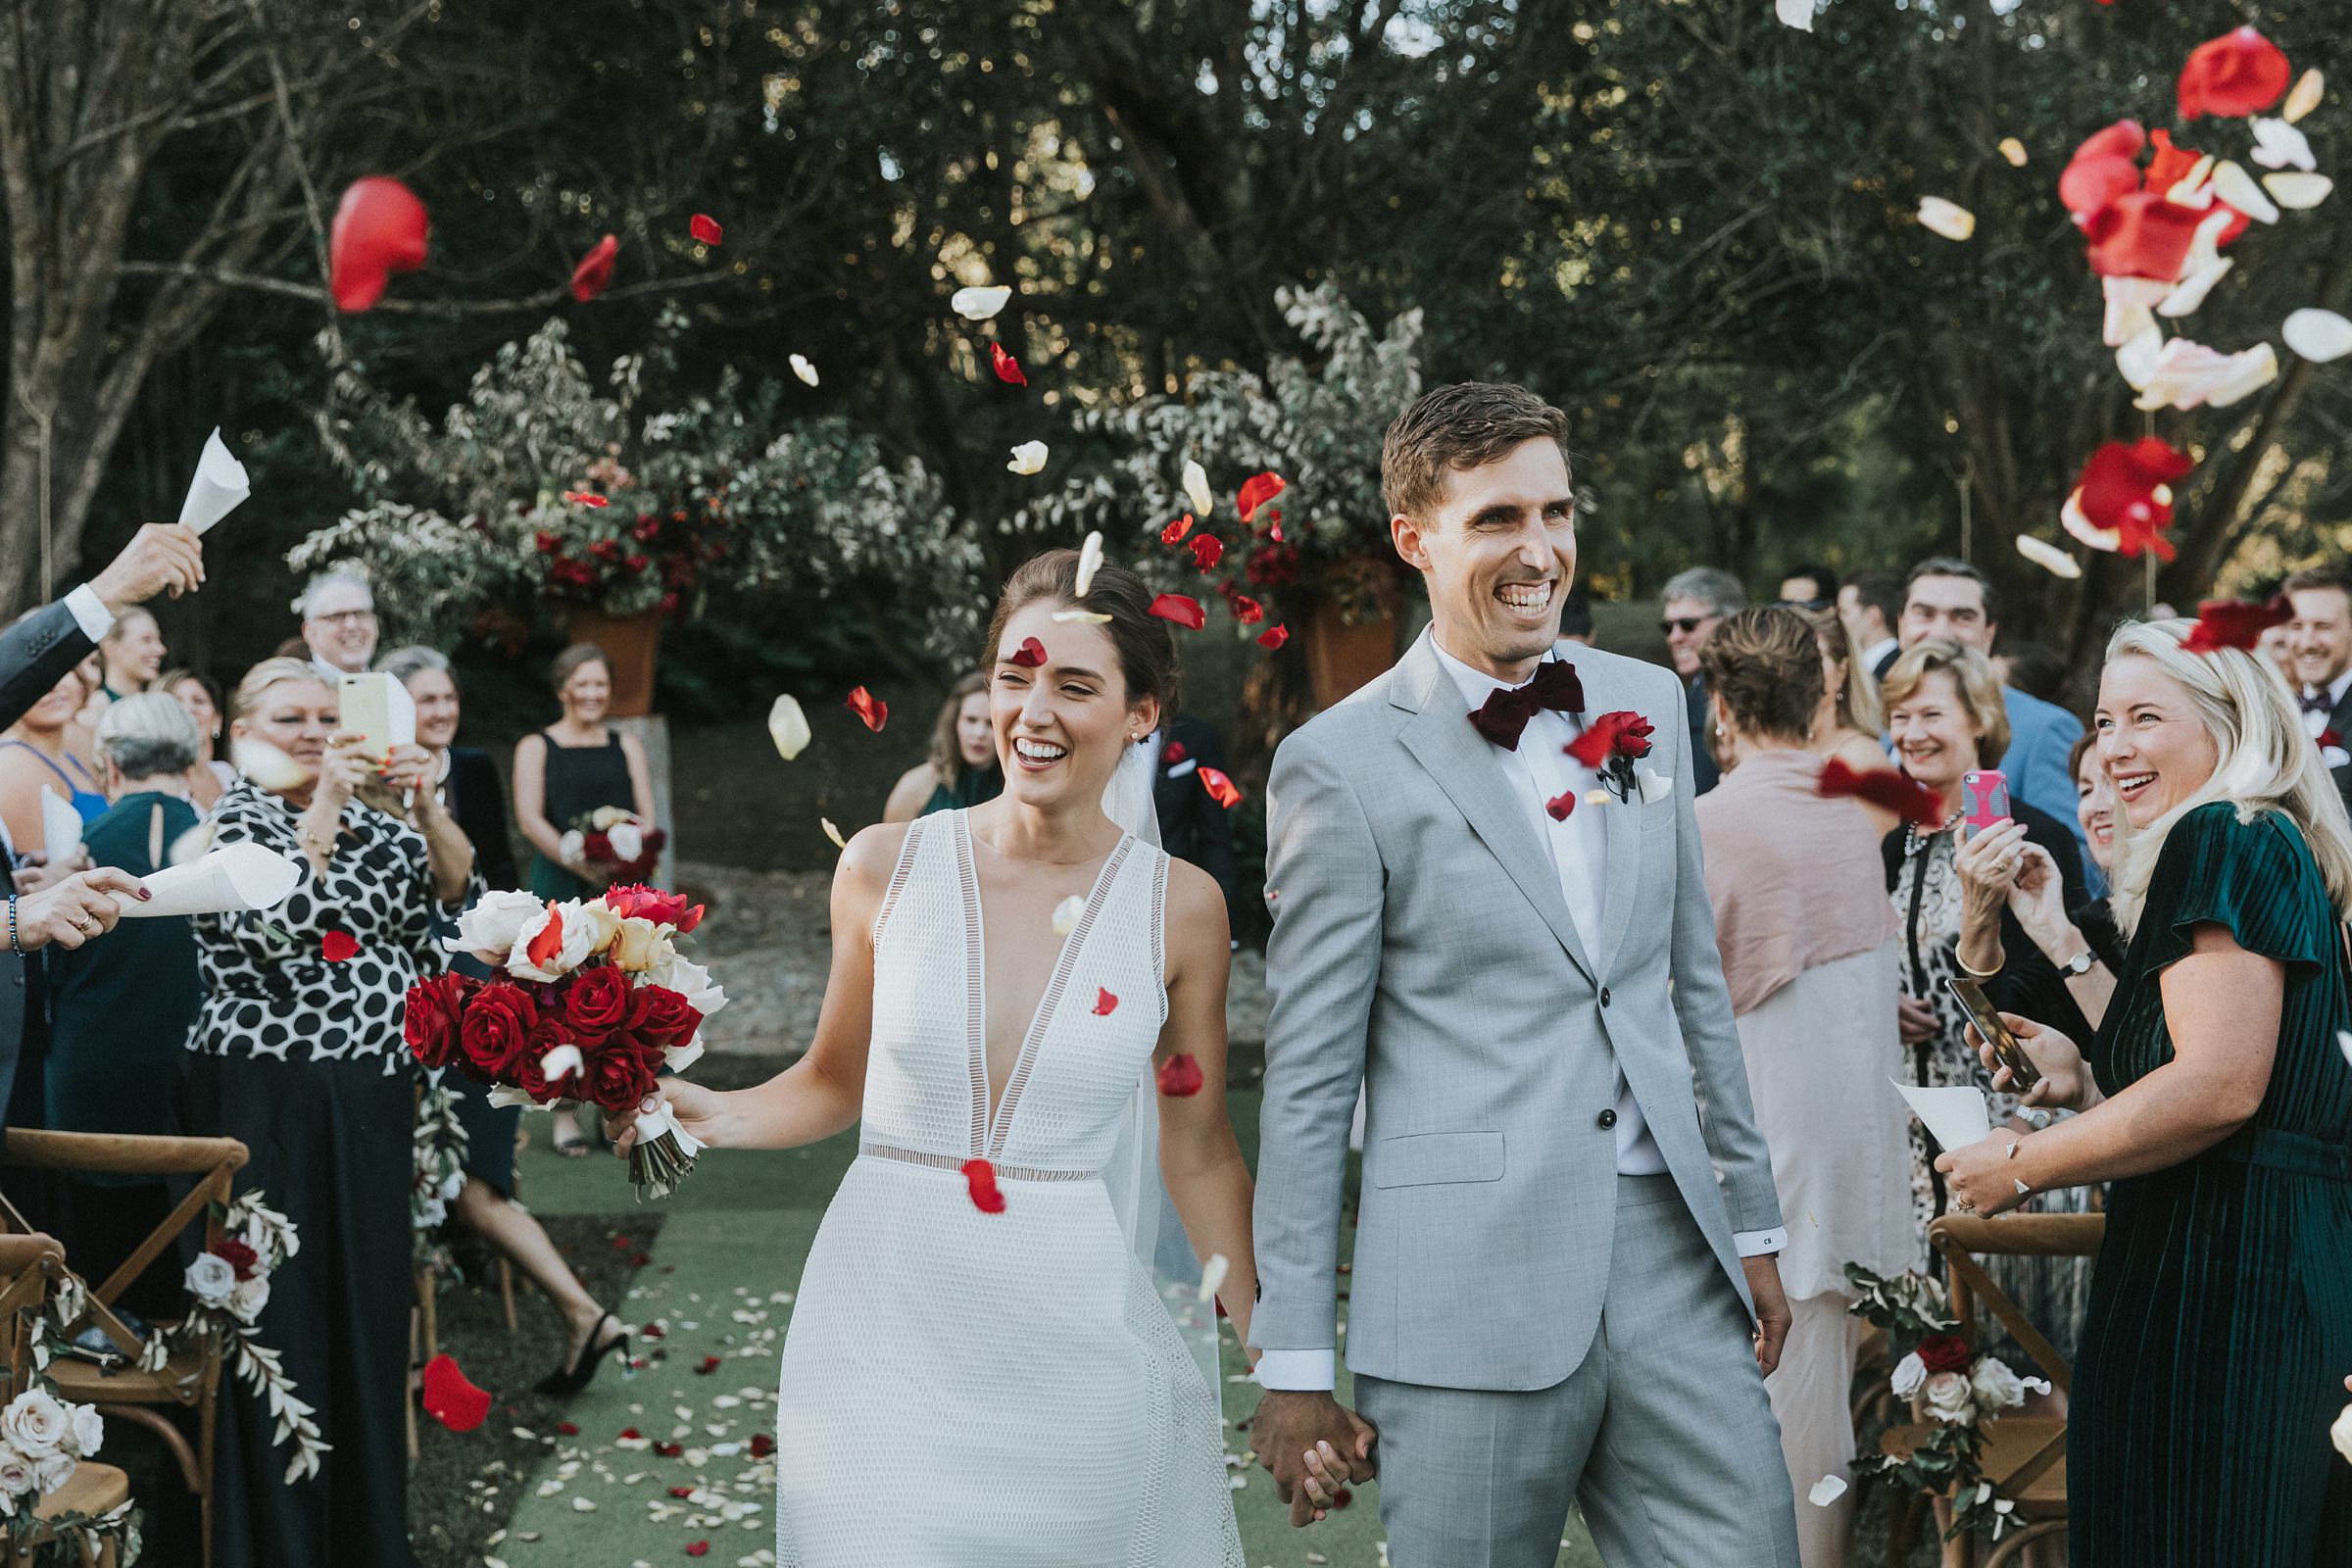 massive smiles from the bride and groom as guests throw rose petals at them